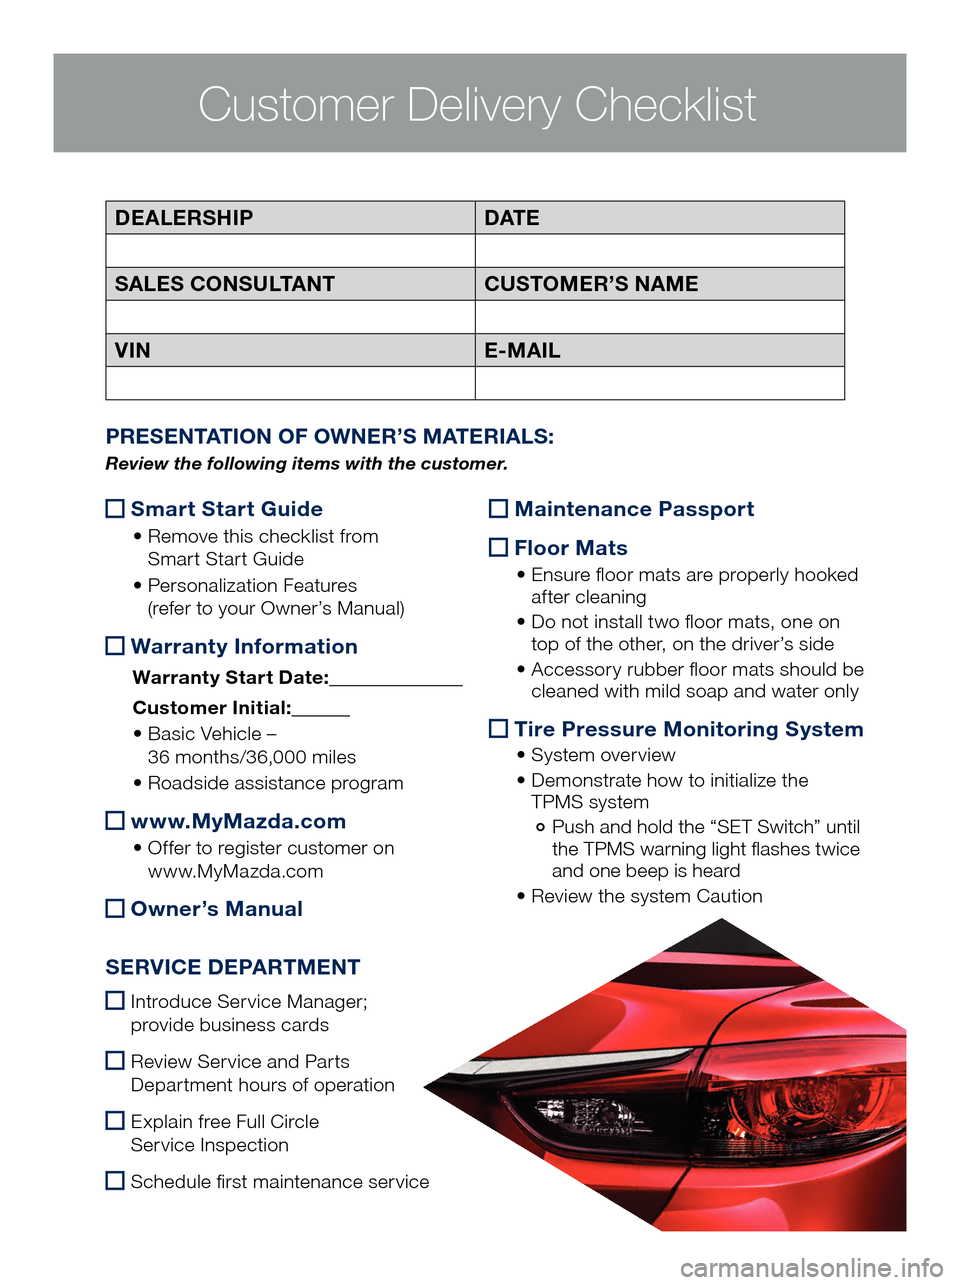 MAZDA MODEL 6 2017  Quick Start Guide (in English) Customer Delivery Checklist
 Smart Start Guide
 •  Remove this checklist from 
 
Sm art Start Guide
 •  Per

sonalization Features   
(refer to your Owner’s Manual)
  War ranty Information
 Warr